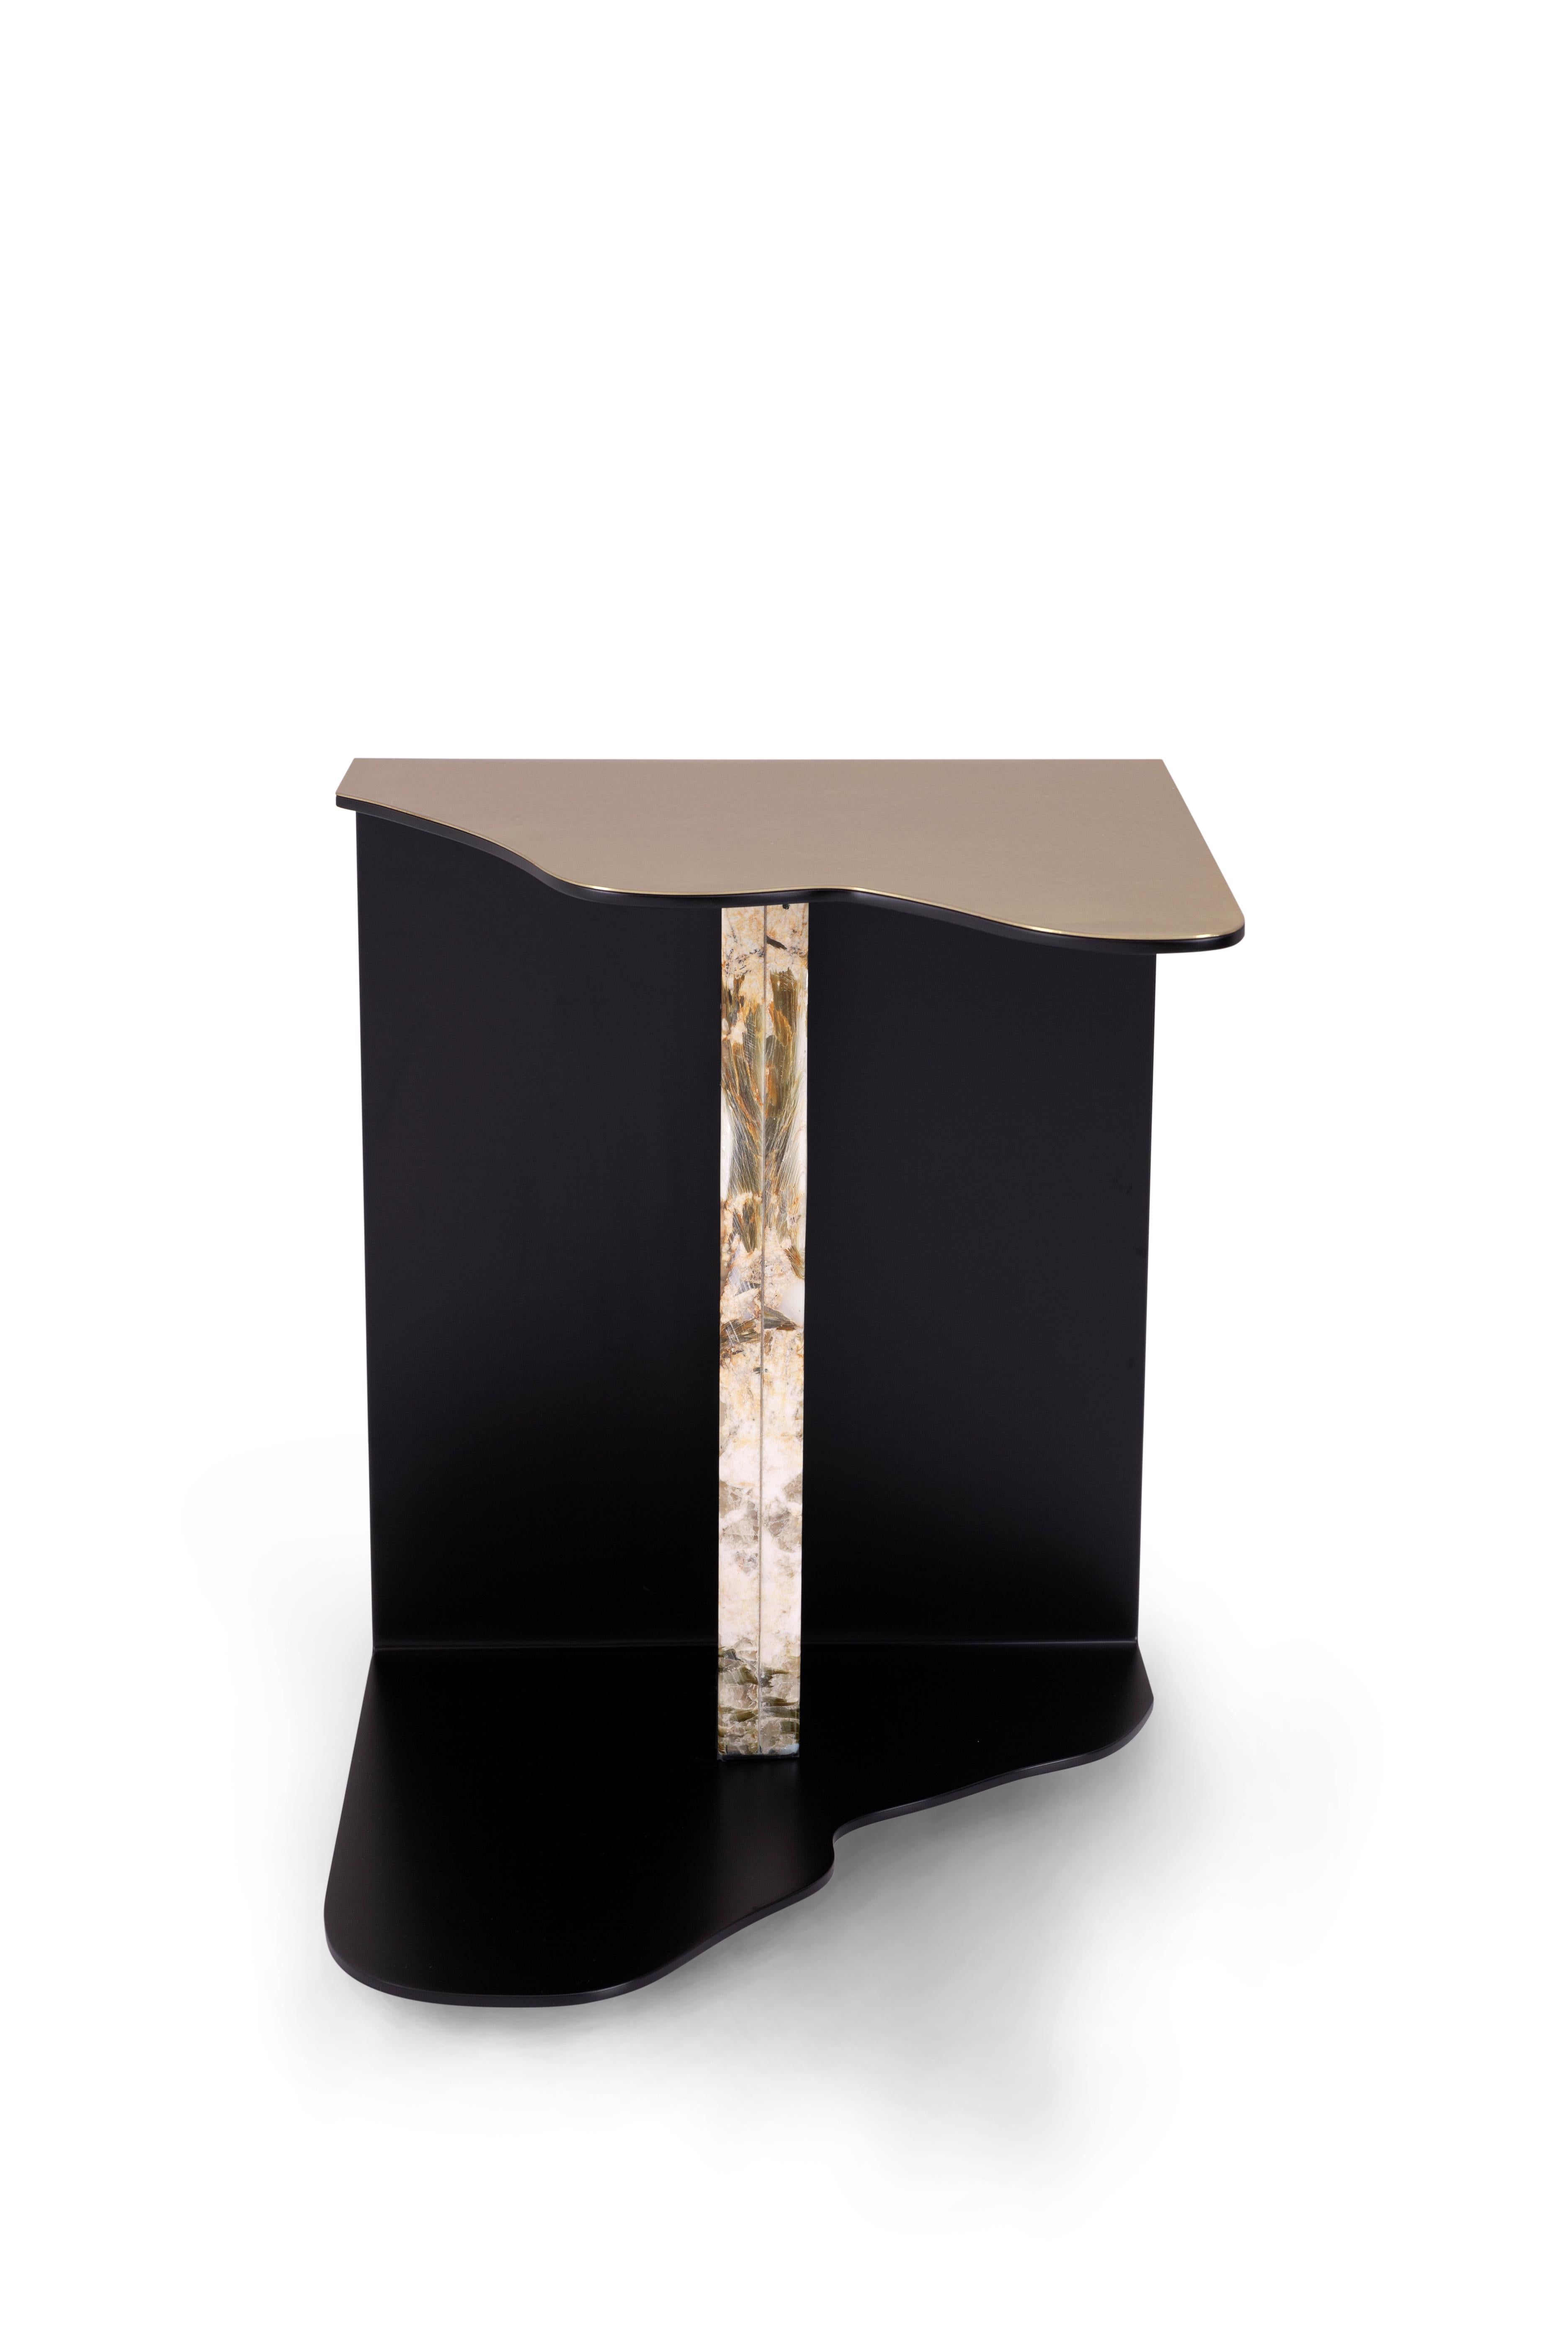 Granite side table by Green Apple
Dimensions: Ø 38 x 42 cm
Materials: black lacquer; satin finish
Brushed brass; high-gloss finish
Patagonia granite; polished

Metal side table outer shell in brushed brass with a high-gloss finish and inner